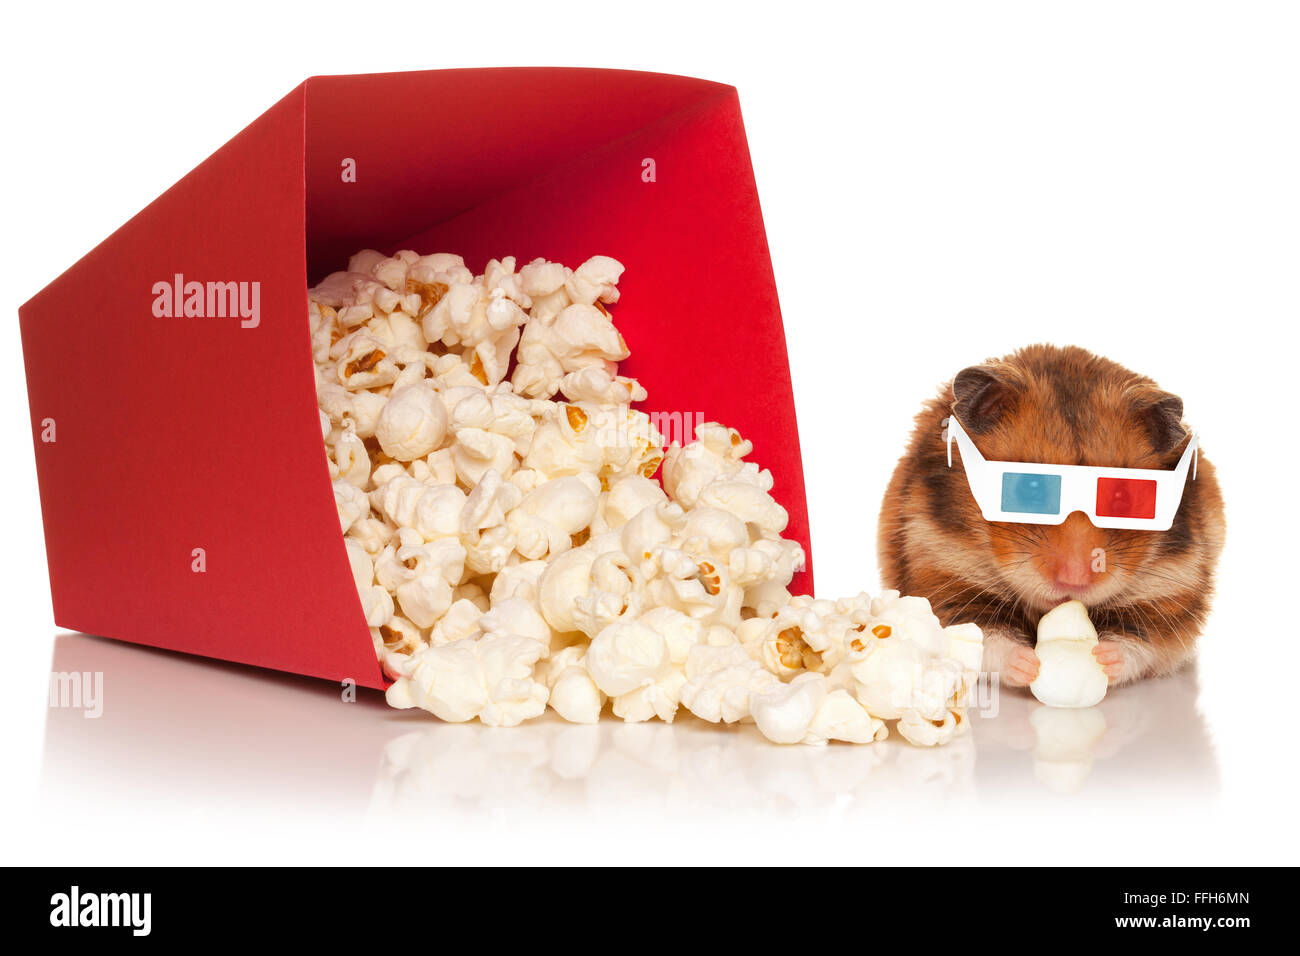 Hamster in 3d glasses chewing popcorn next to the red bucket, isolated on the white background. Stock Photo